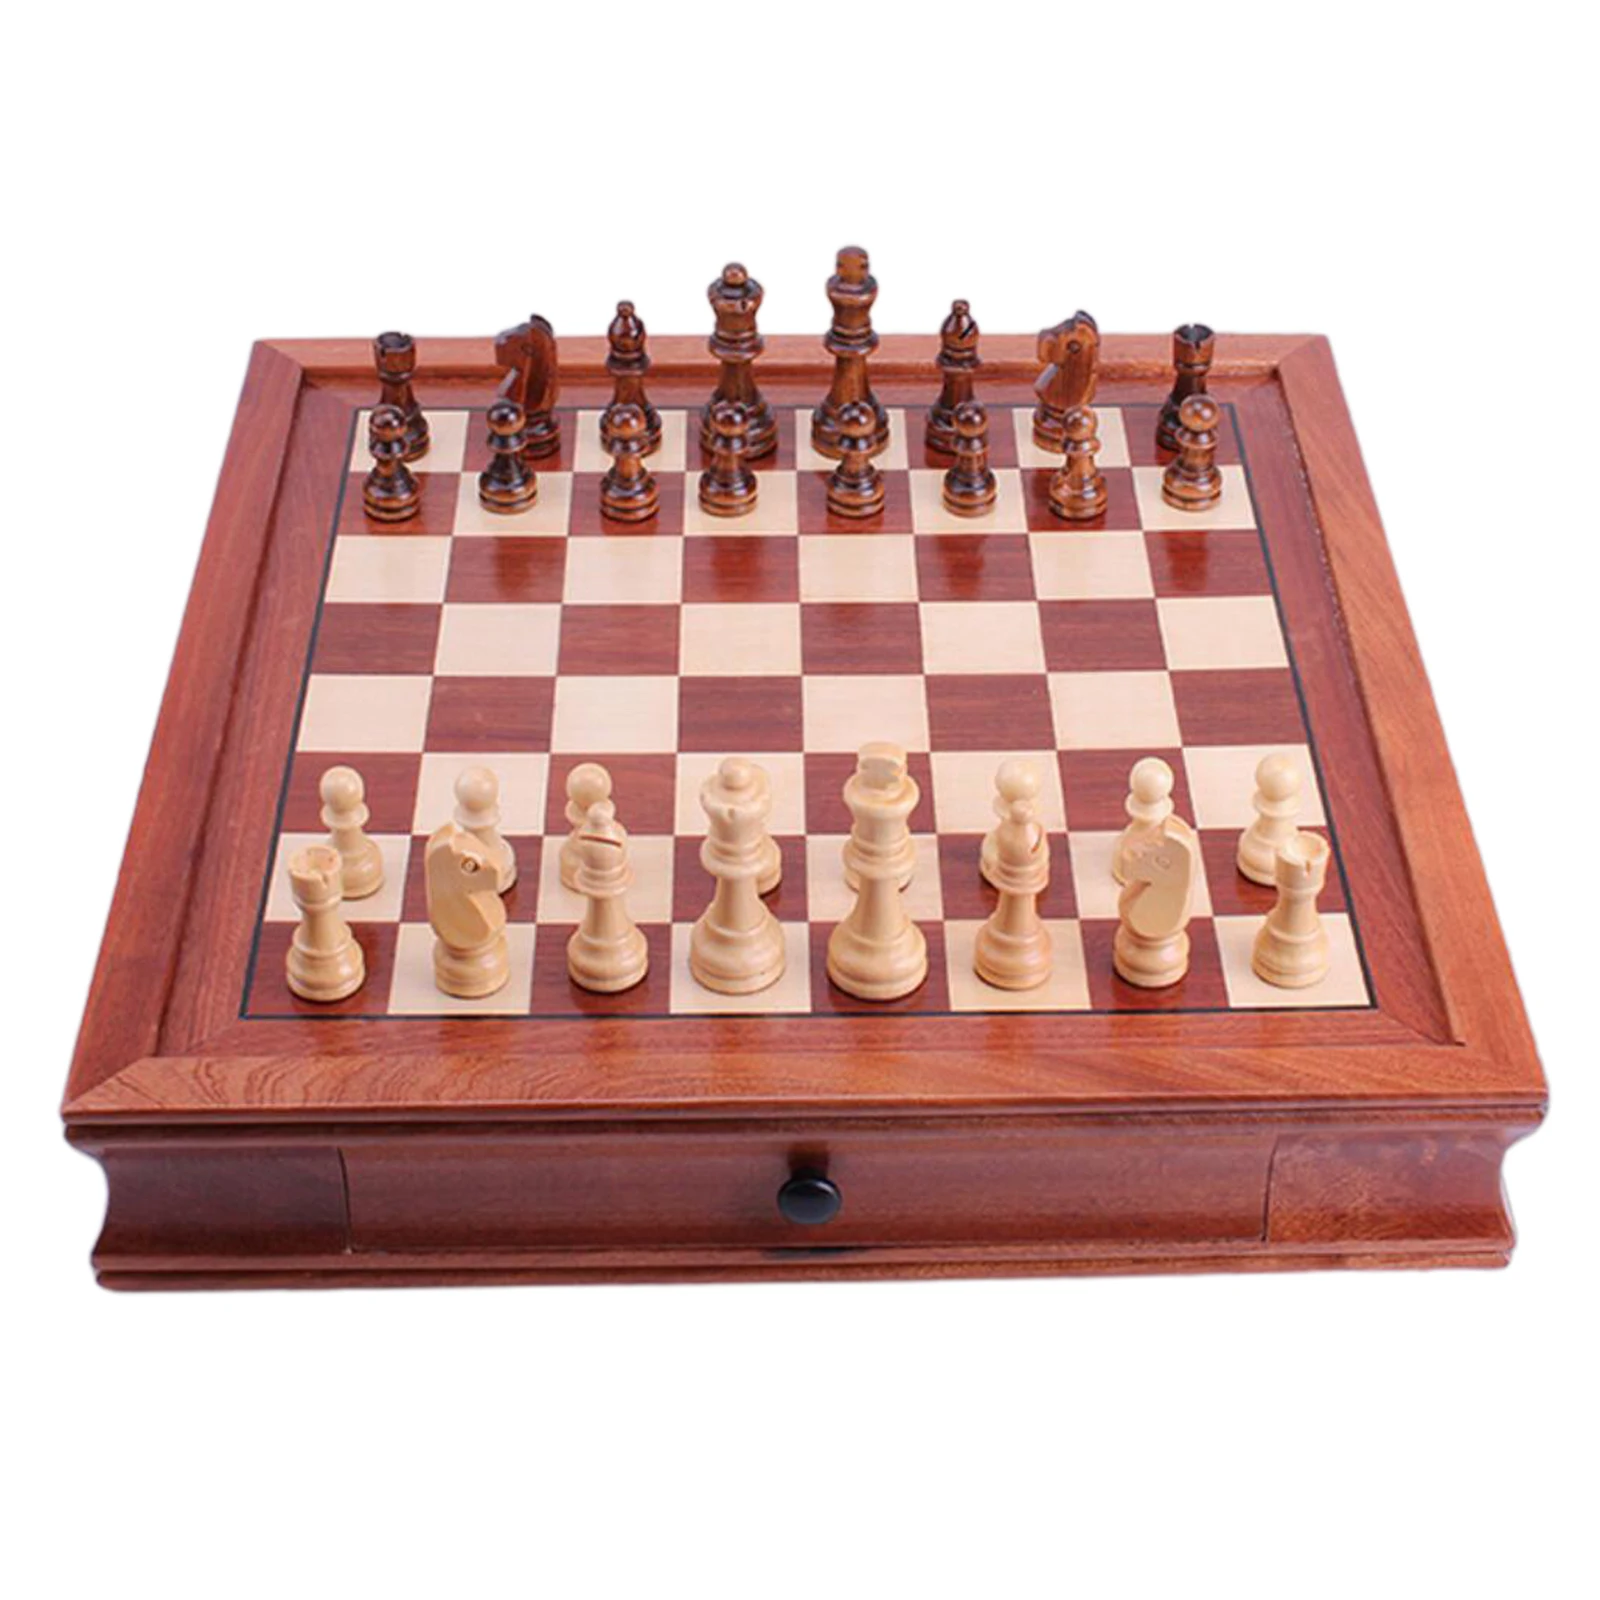 32x32cm Wooden International Chess Set with Storage Drawer Board Game Funny Game Chessmen Collection Board Game